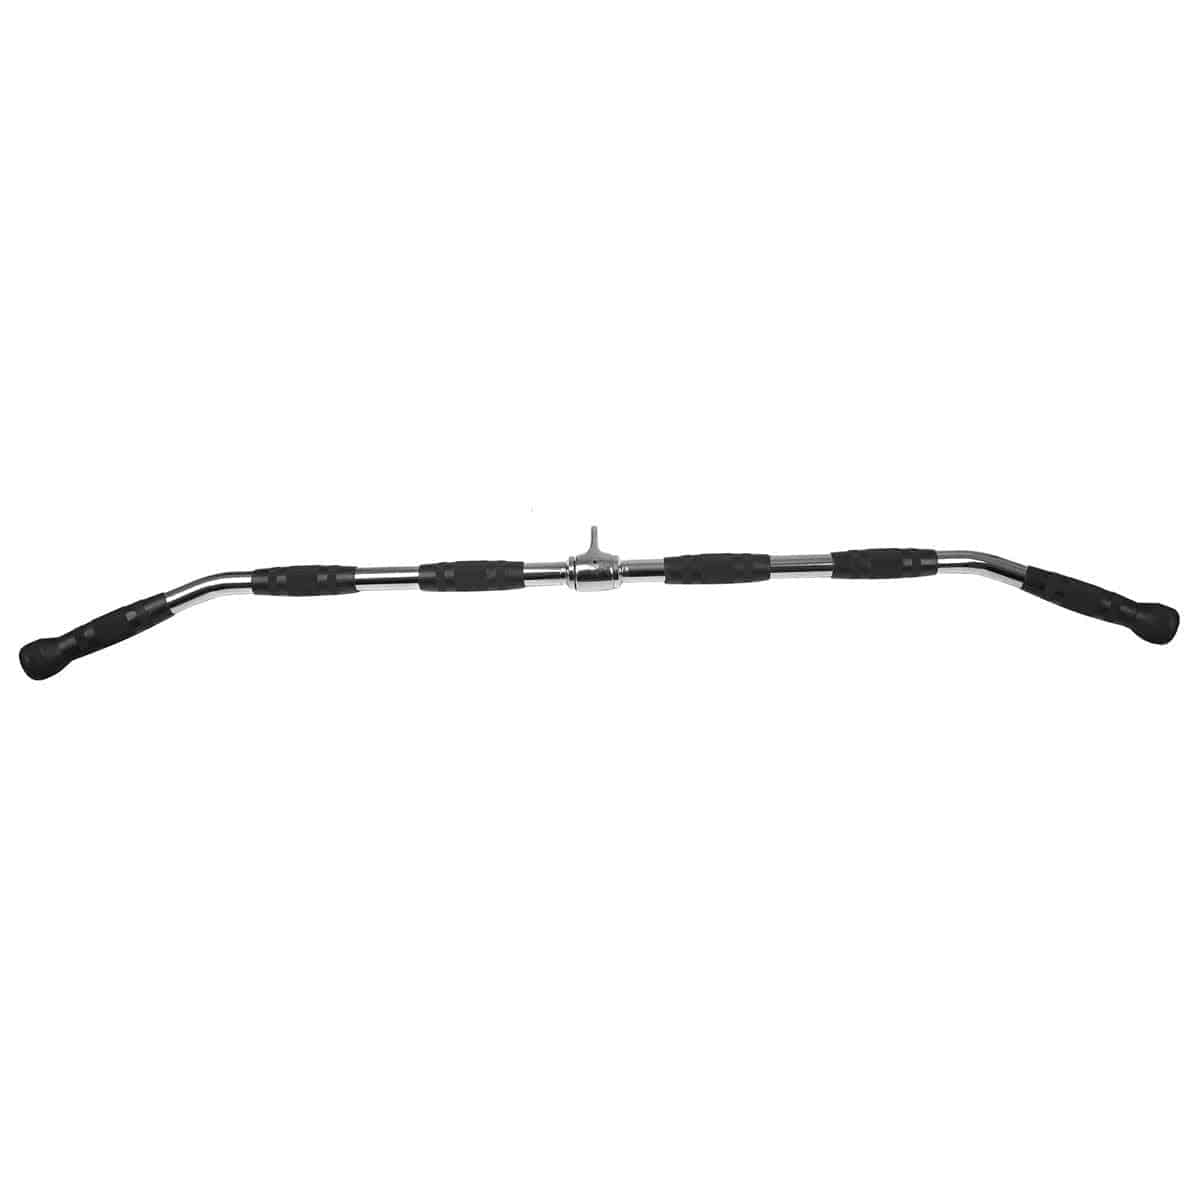 Lat Pulldown Bar 48" Rubber Grips | Cable Attachment [120cm]